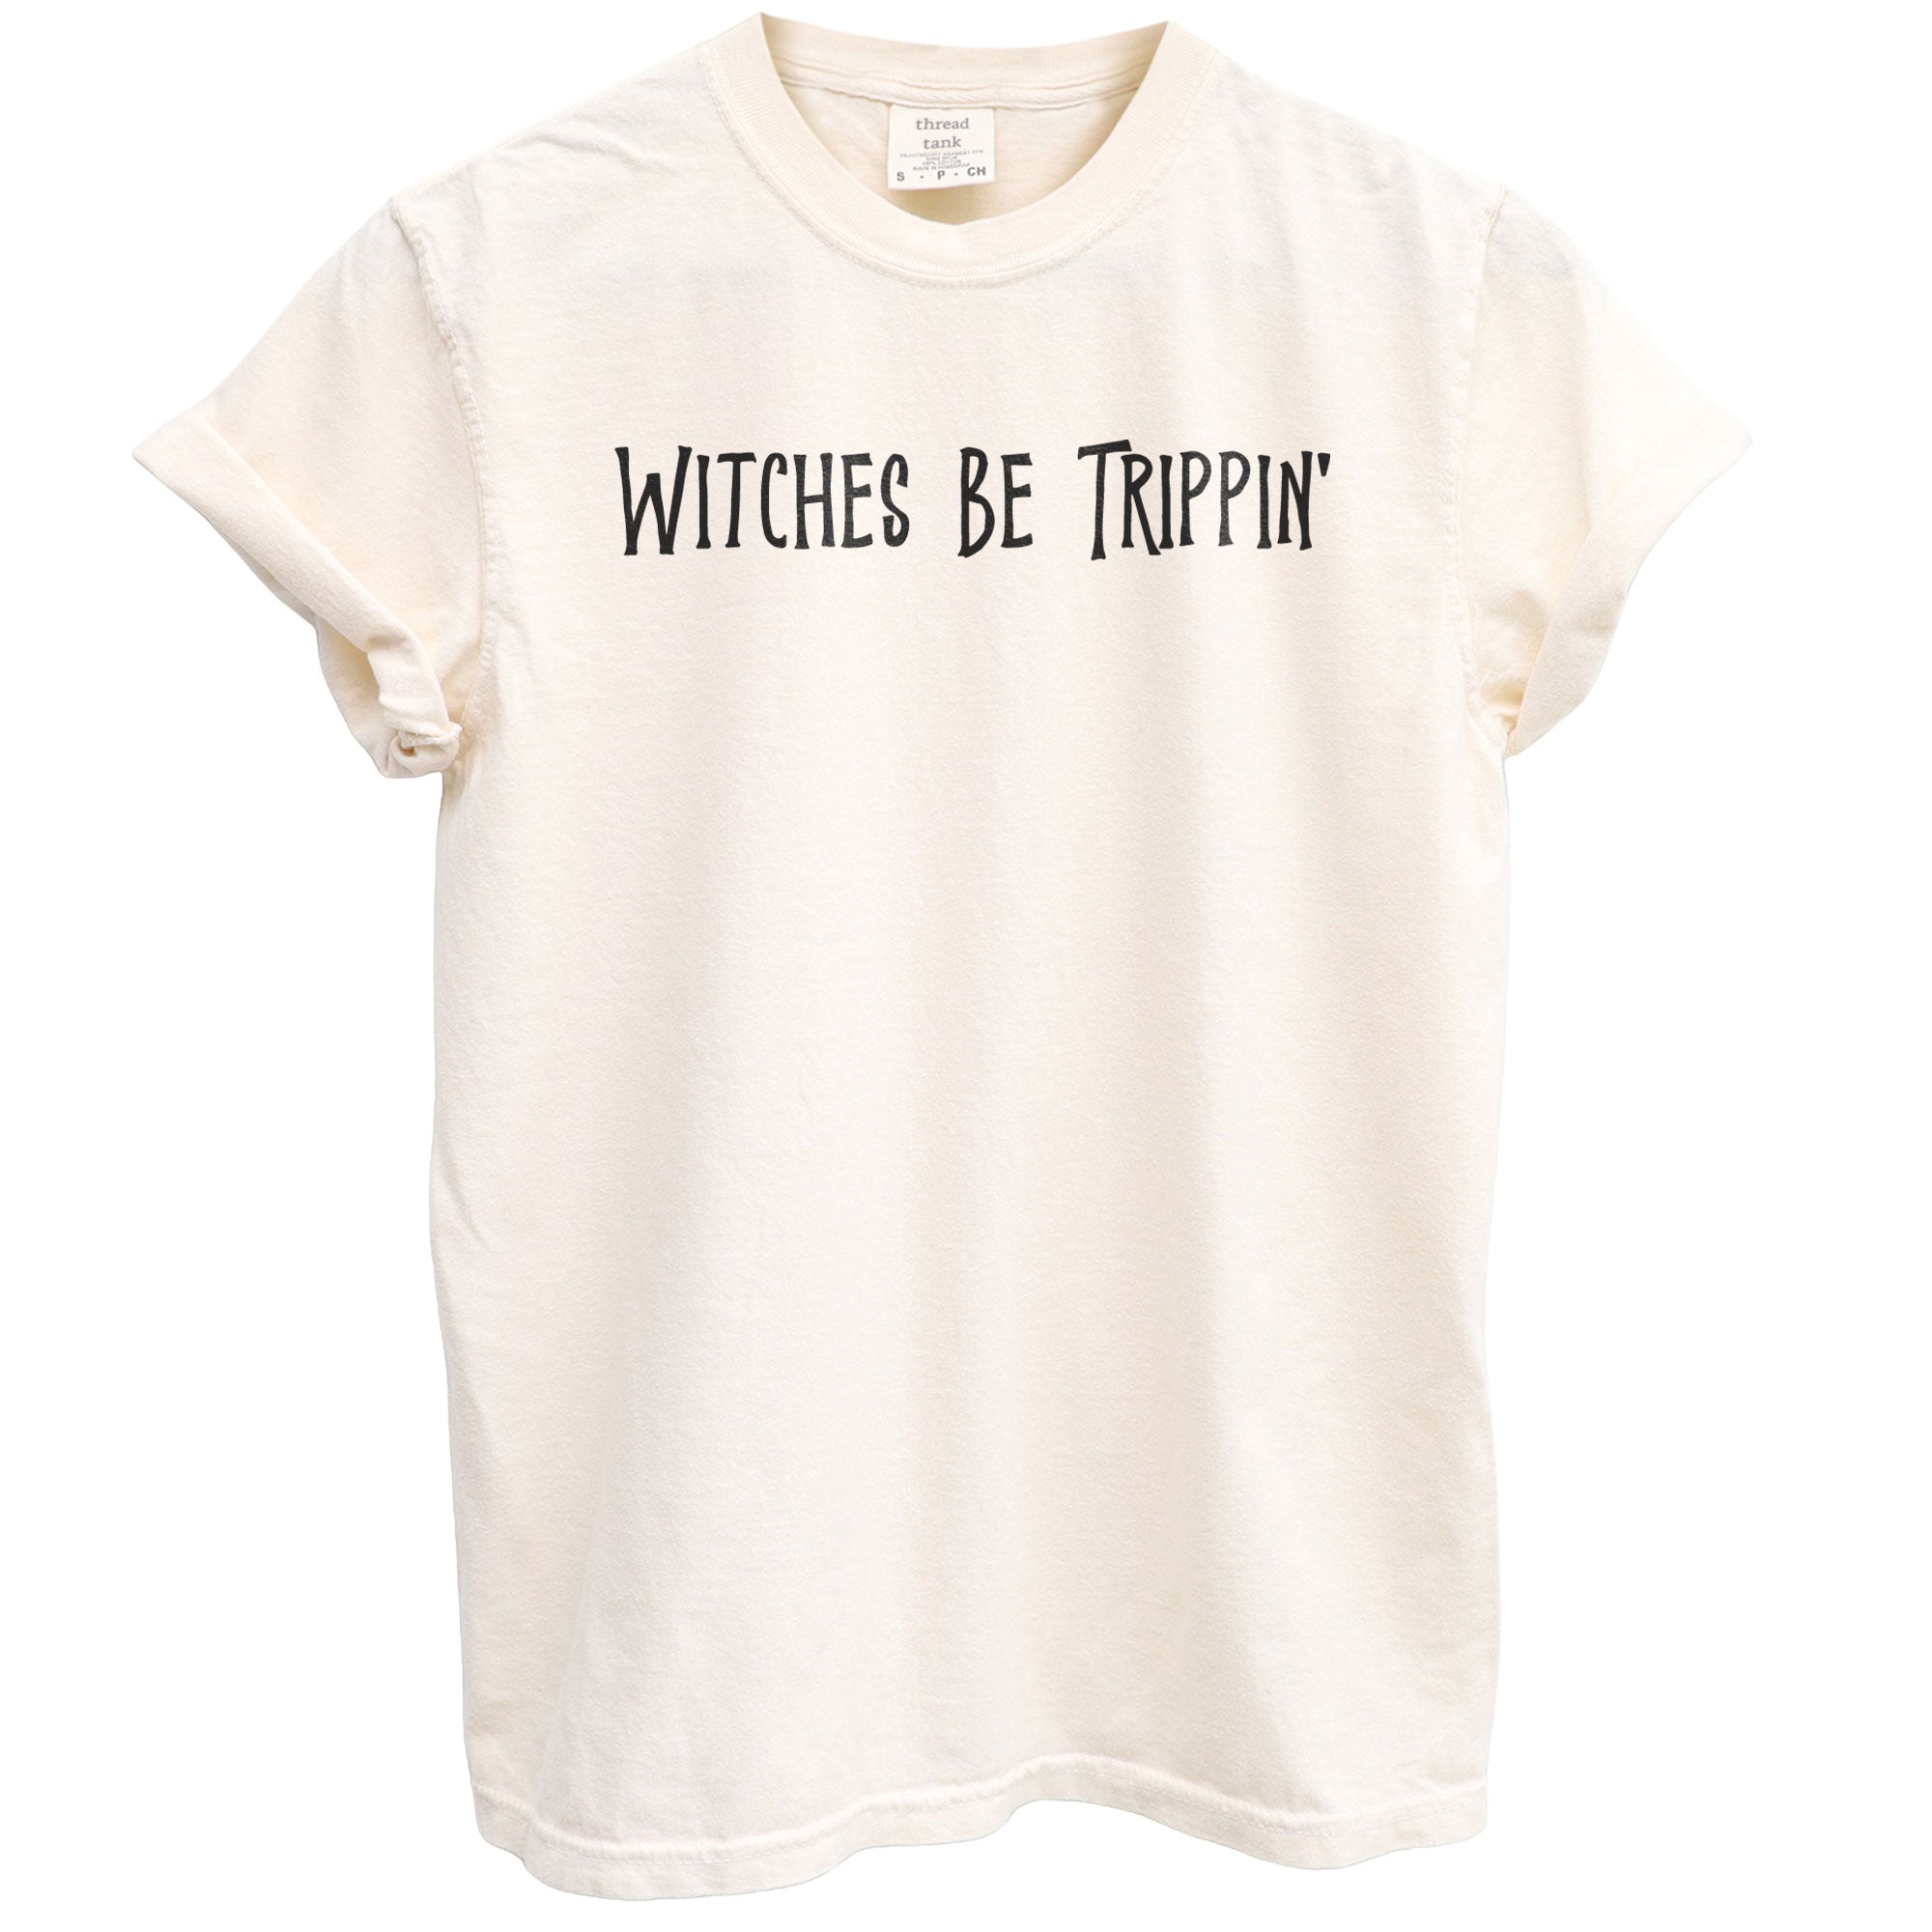 witches be trippin oversized garment dyed shirt